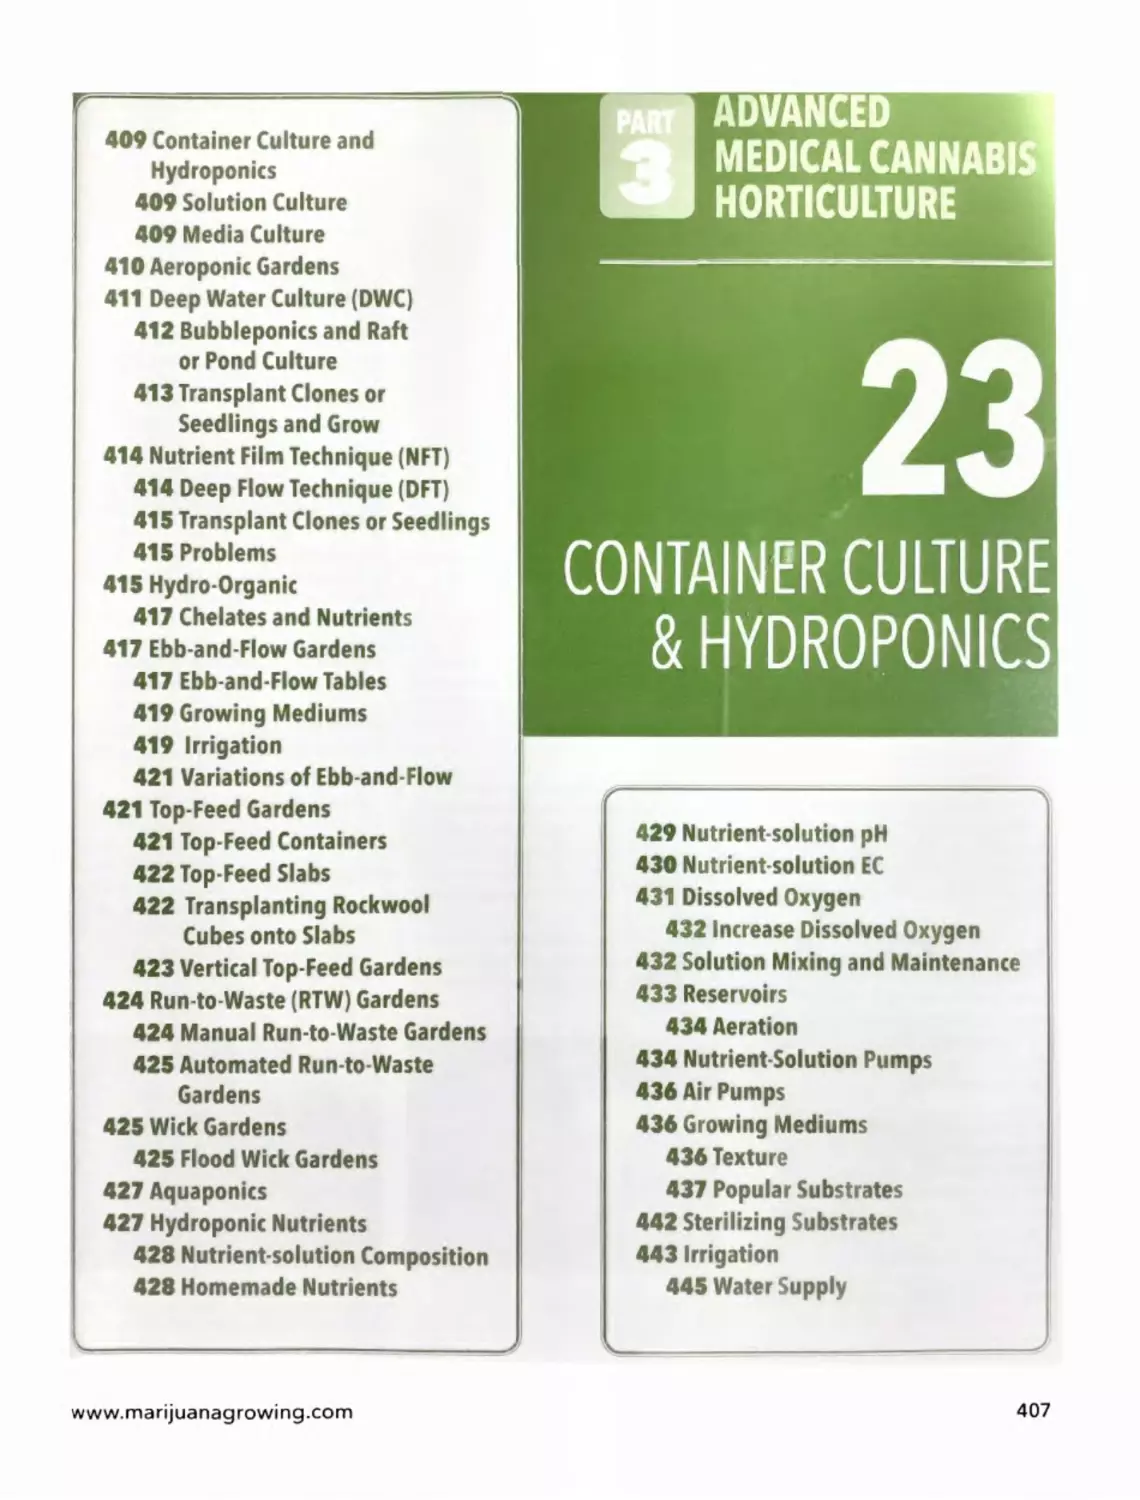 Chapter 23 - Container Culture & Hydroponics